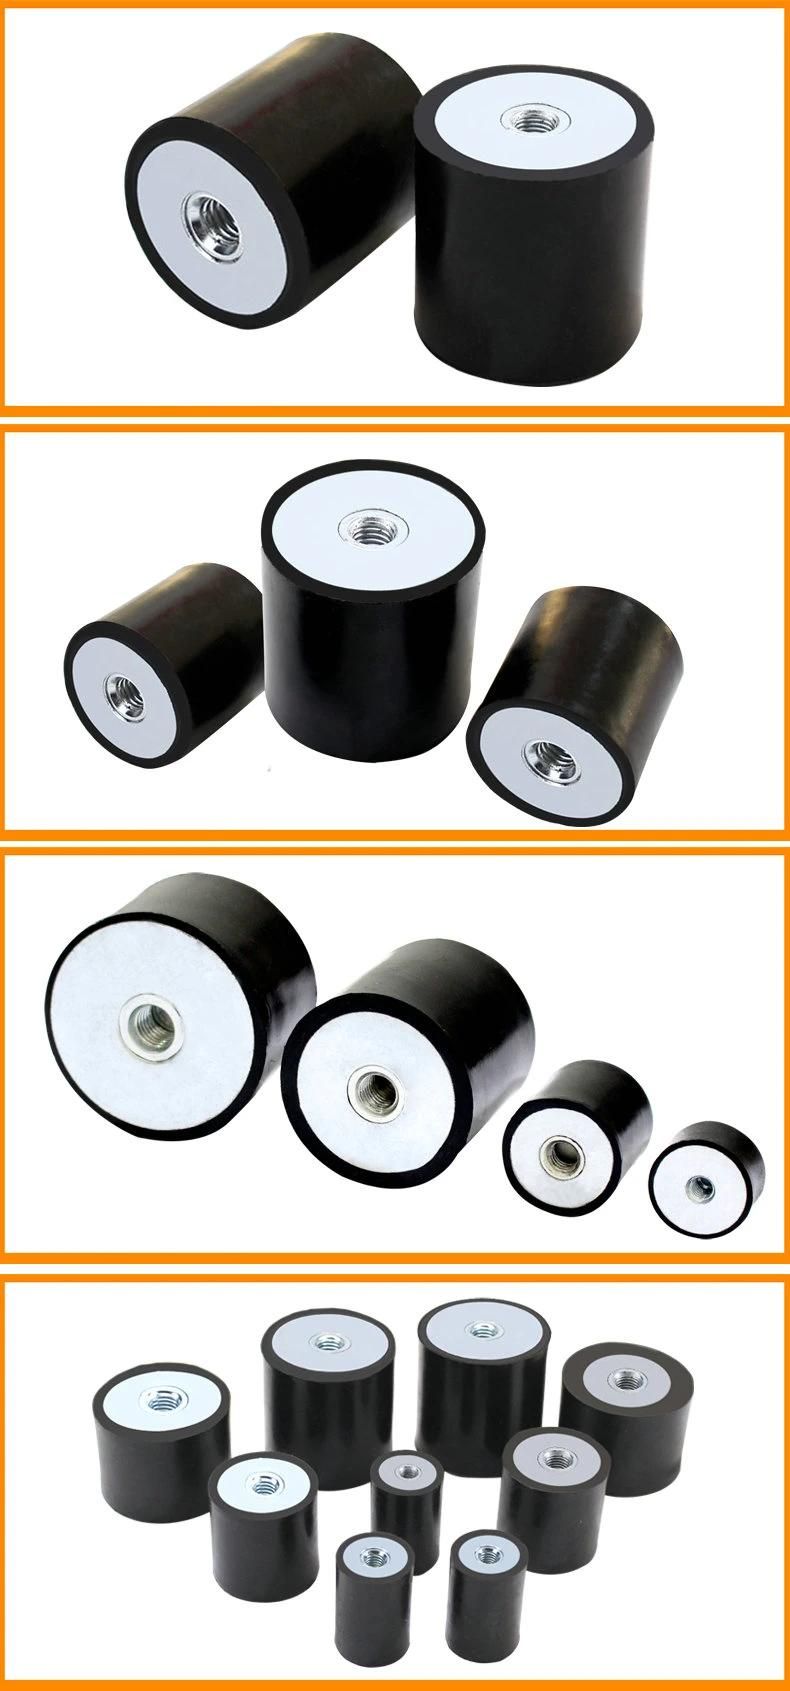 C-FF Type Rubber Mounts, Rubber Mountings, Rubber Shock Absorber (3A4003)